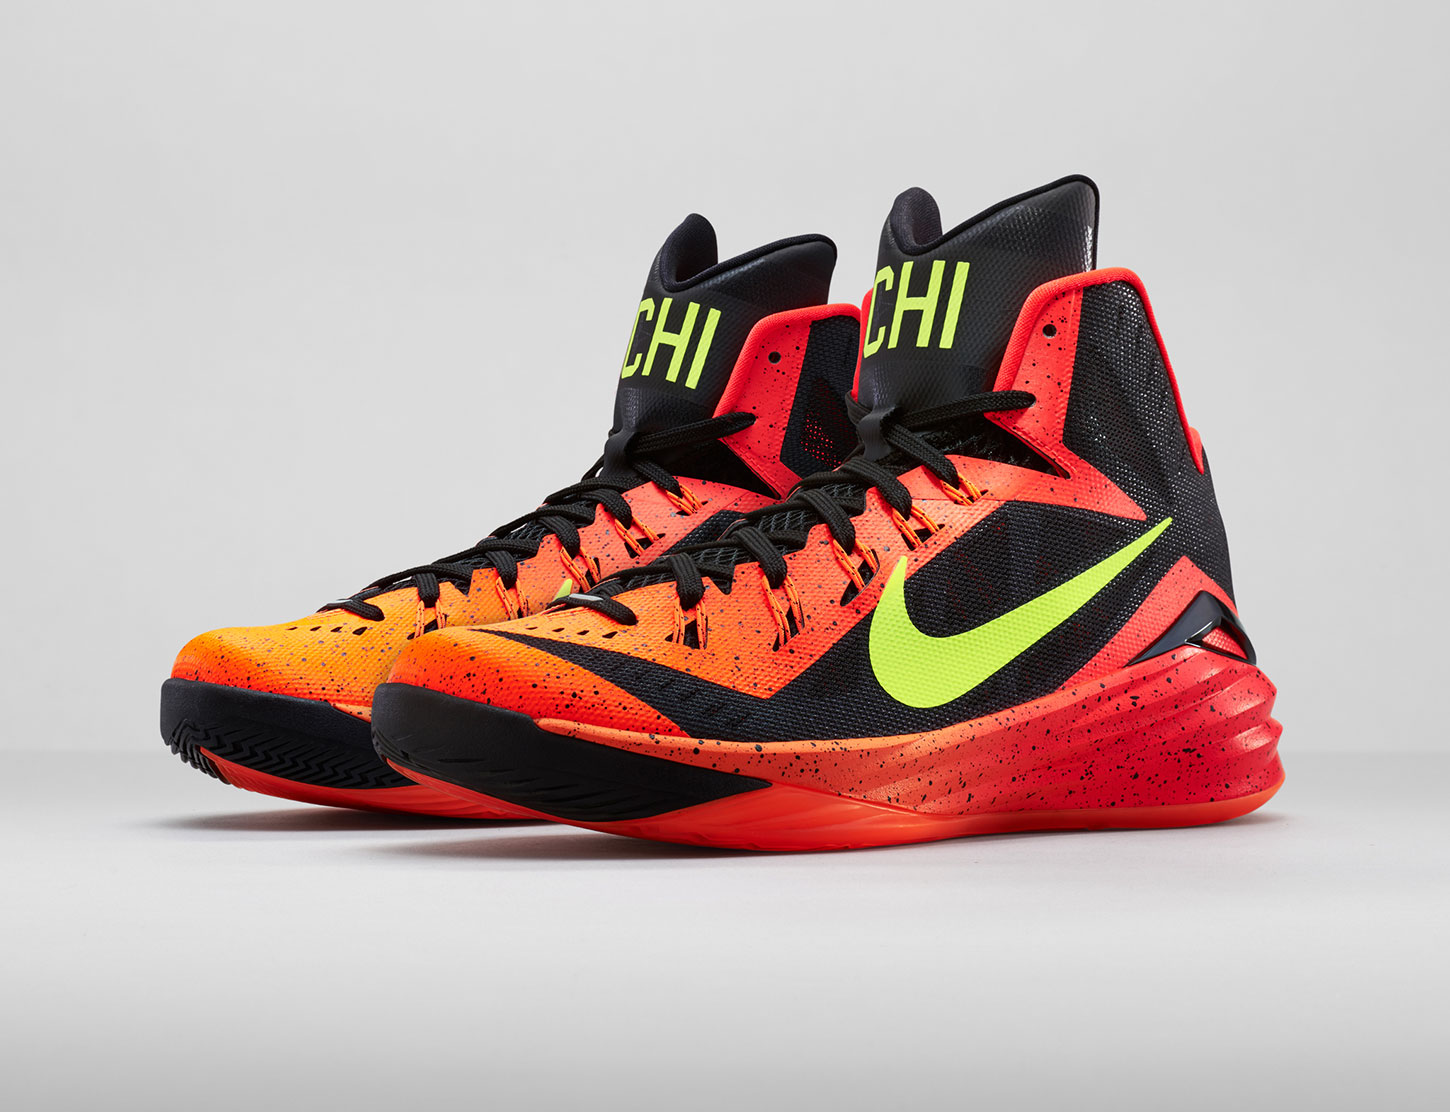 NIKE HYPERDUNK 2014 CITY PACK TO DEBUT AT WORLD BASKETBALL 